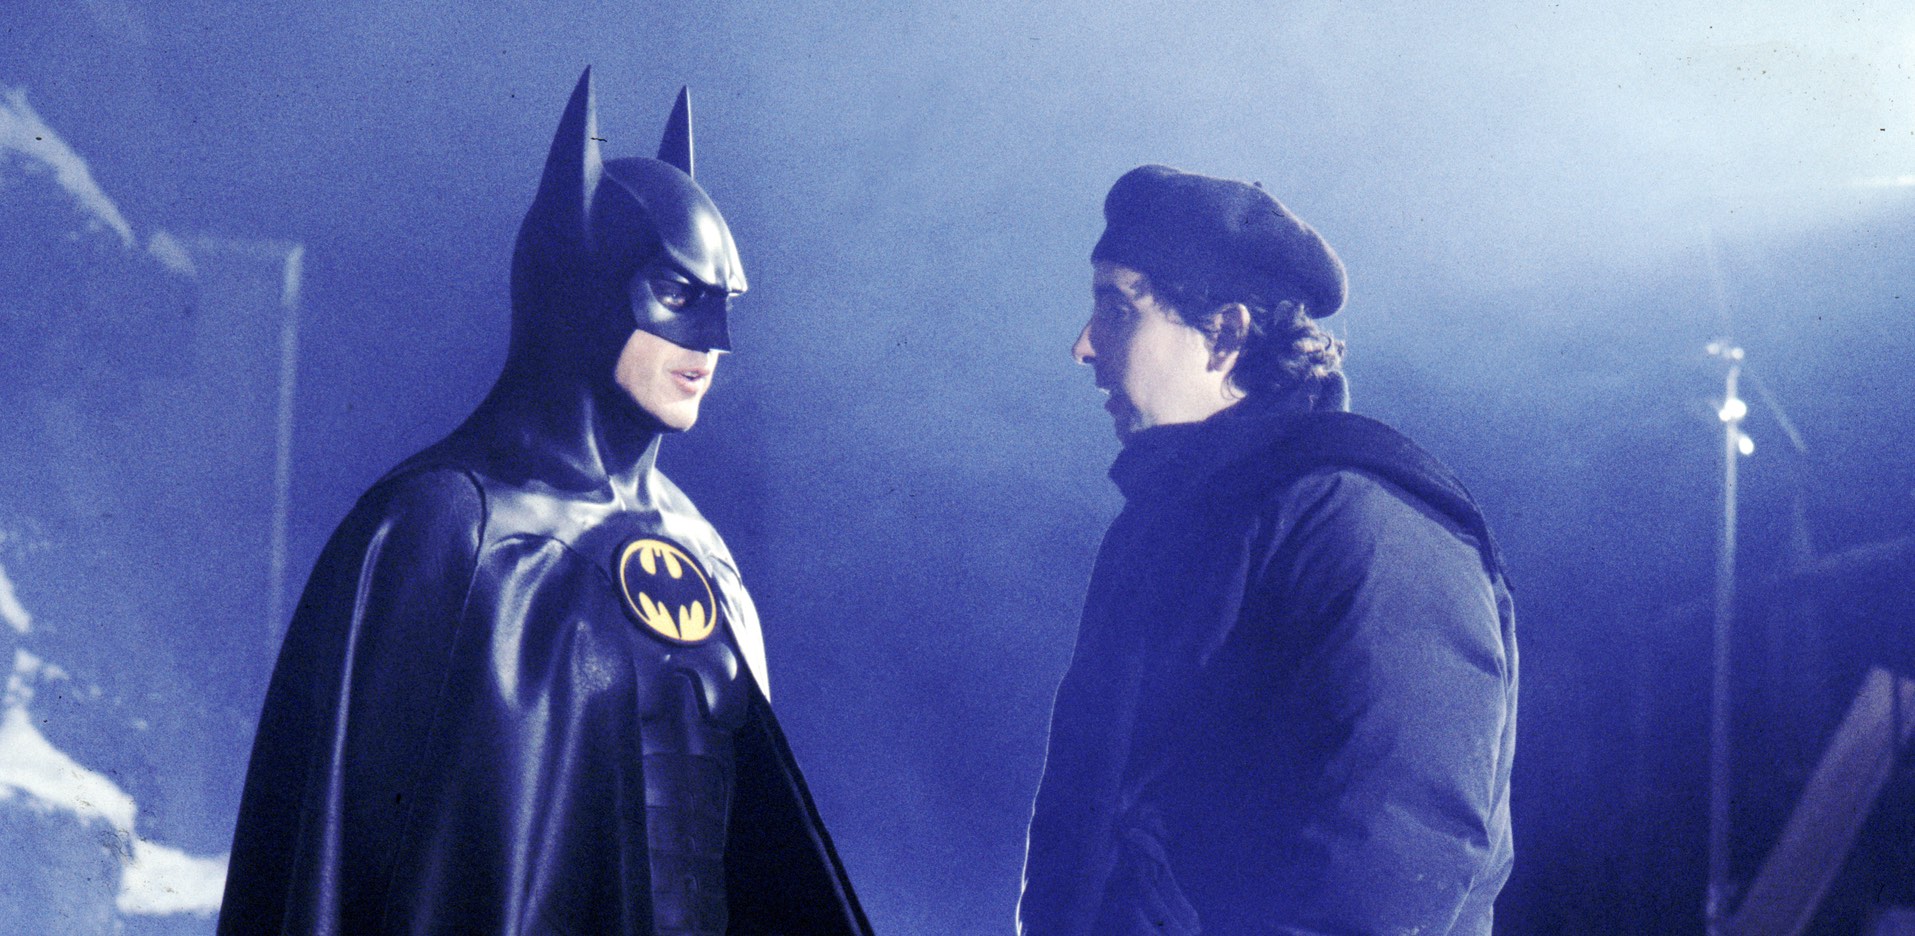 From the Archive: Batman Returns